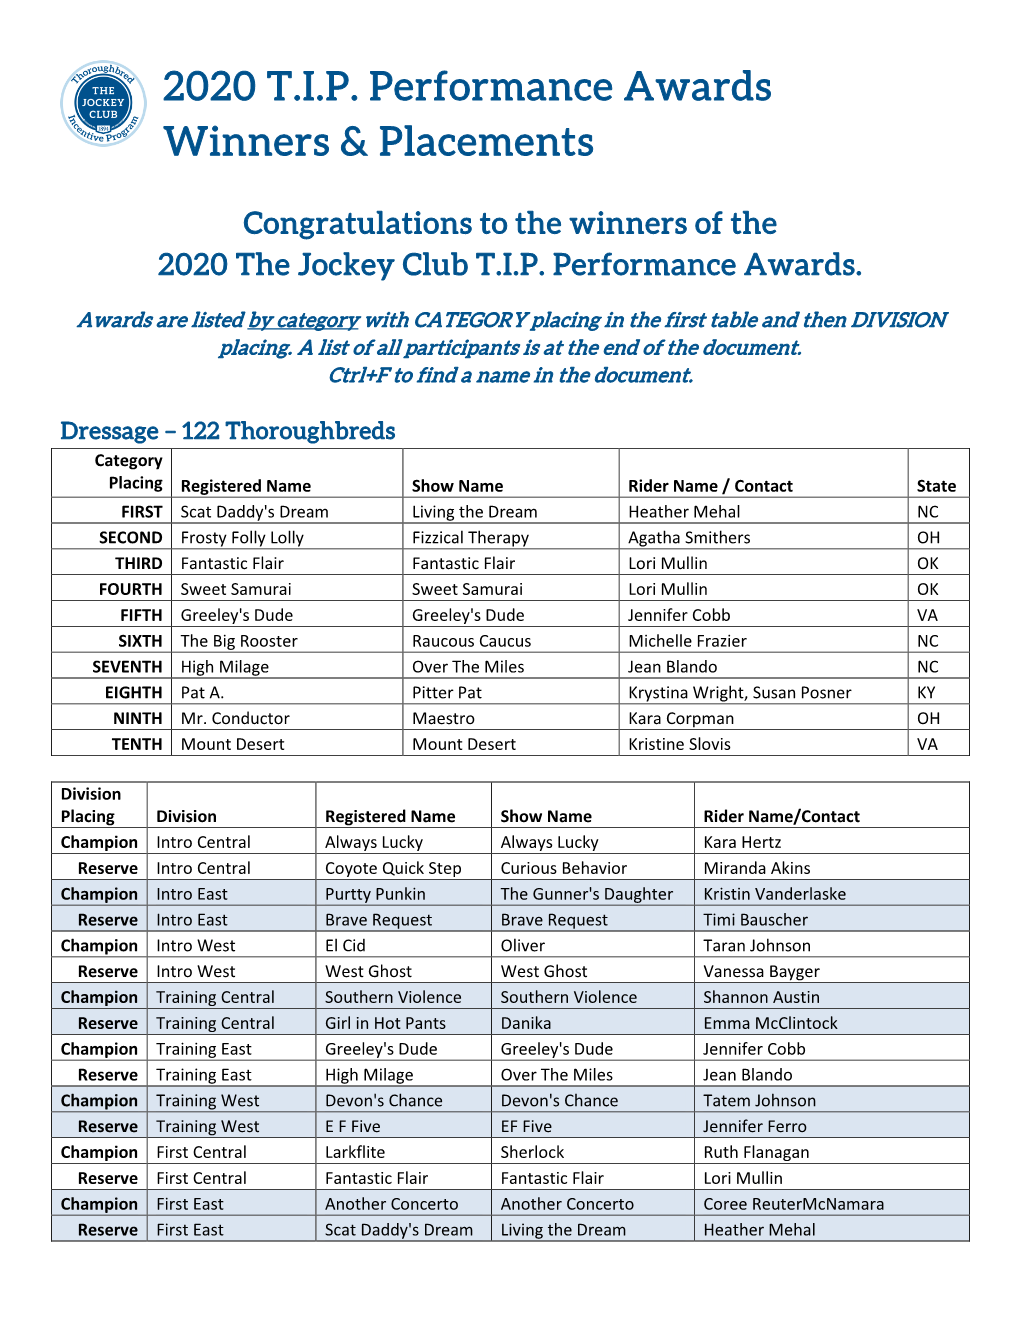 2020 T.I.P. Performance Awards Winners & Placements